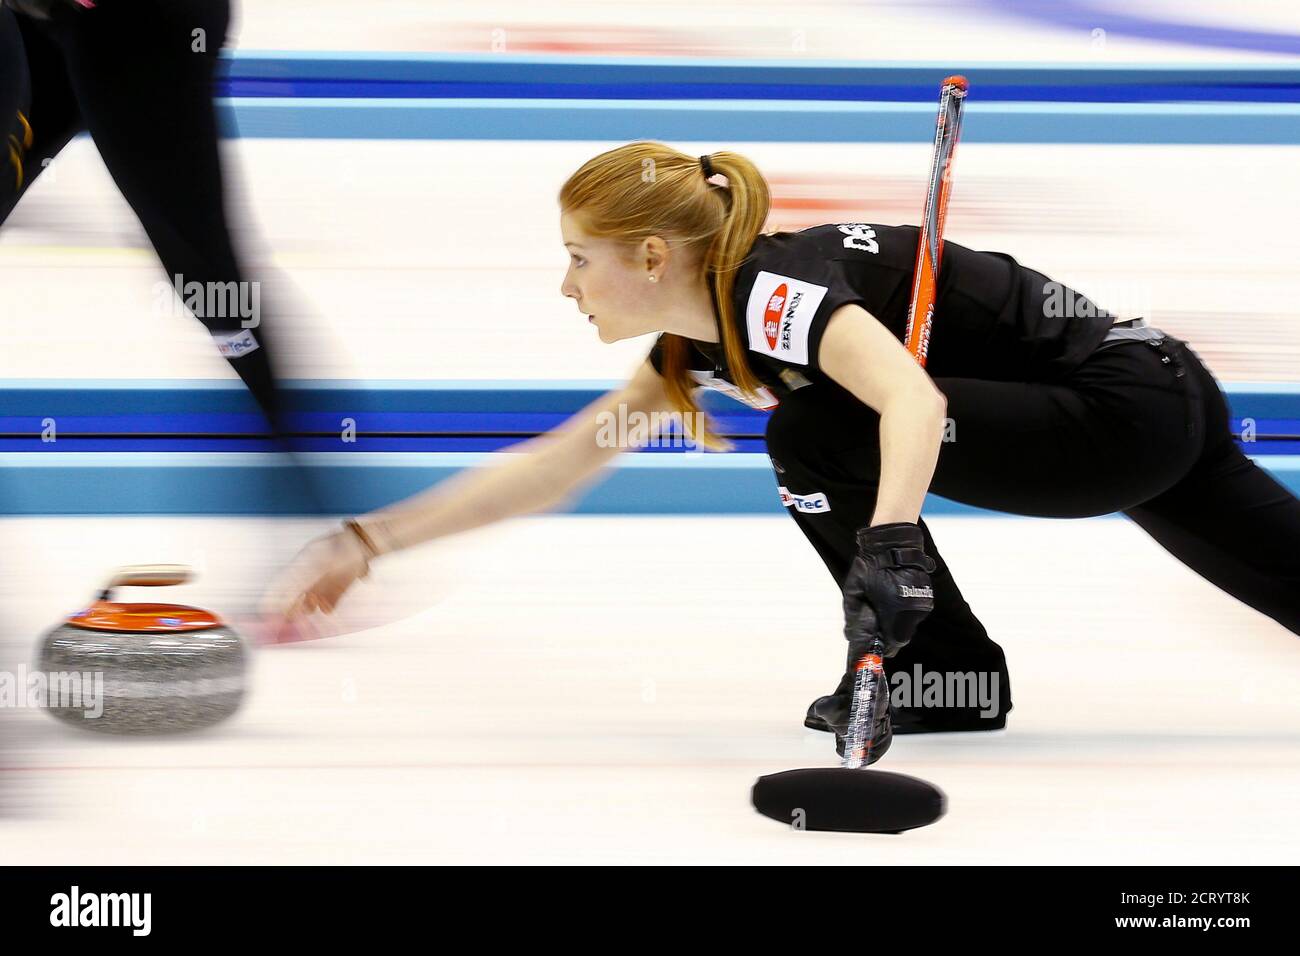 Germany's Stella Heiss delivers a stone during her curling round robin game against Russia at the World Women's Curling Championships in Sapporo March 18, 2015.  REUTERS/Thomas Peter (JAPAN - Tags: SPORT CURLING) Stock Photo